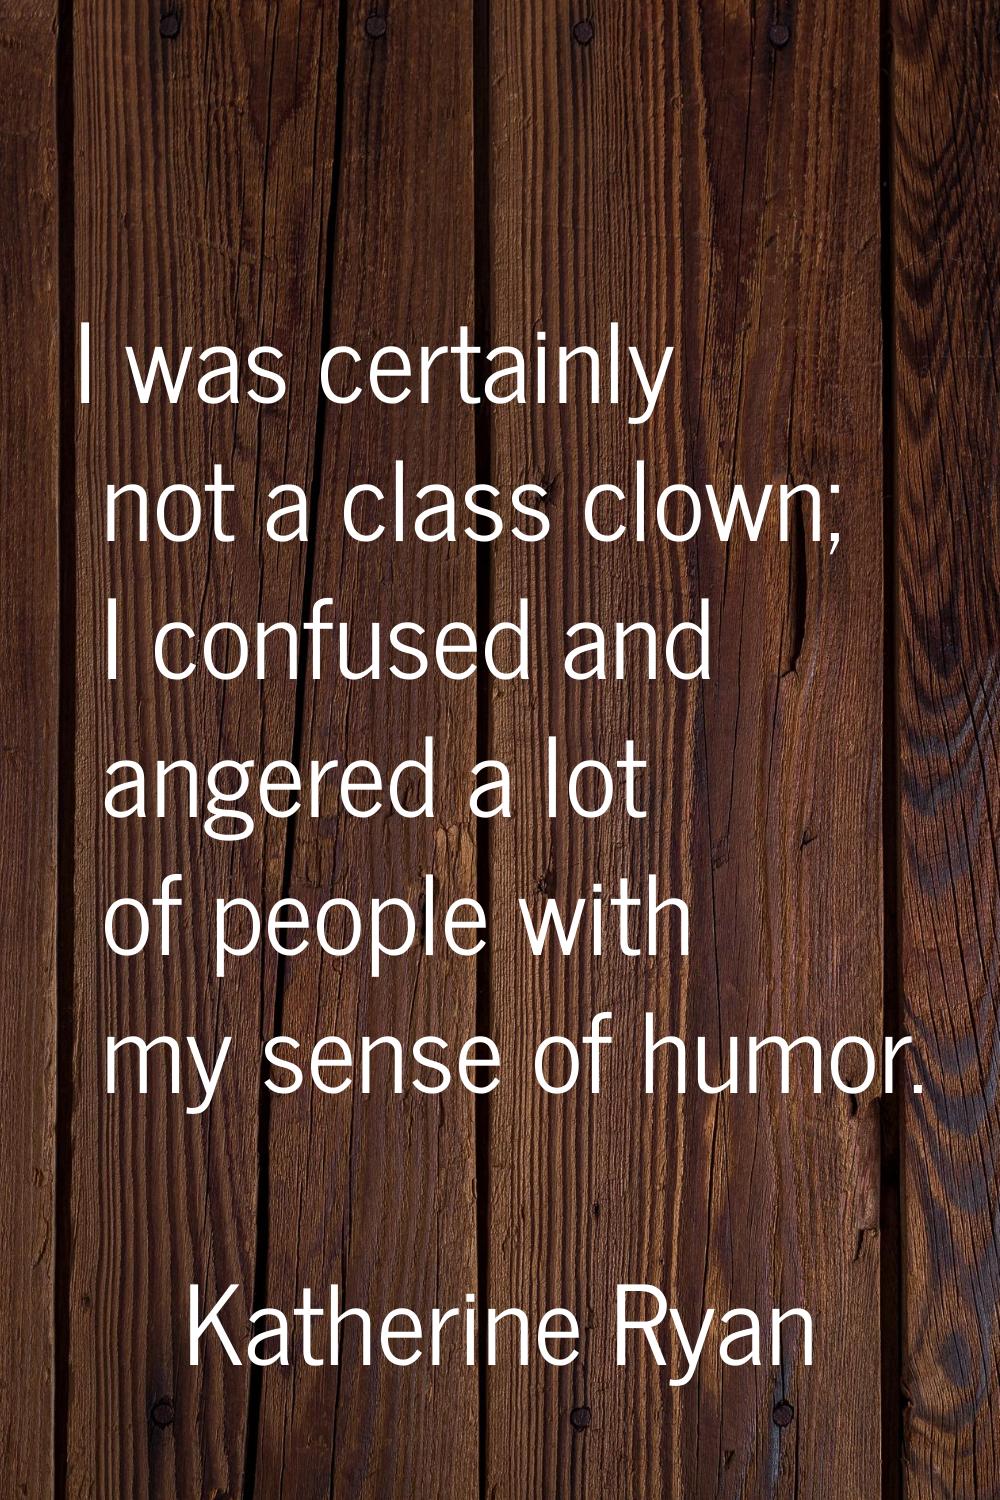 I was certainly not a class clown; I confused and angered a lot of people with my sense of humor.